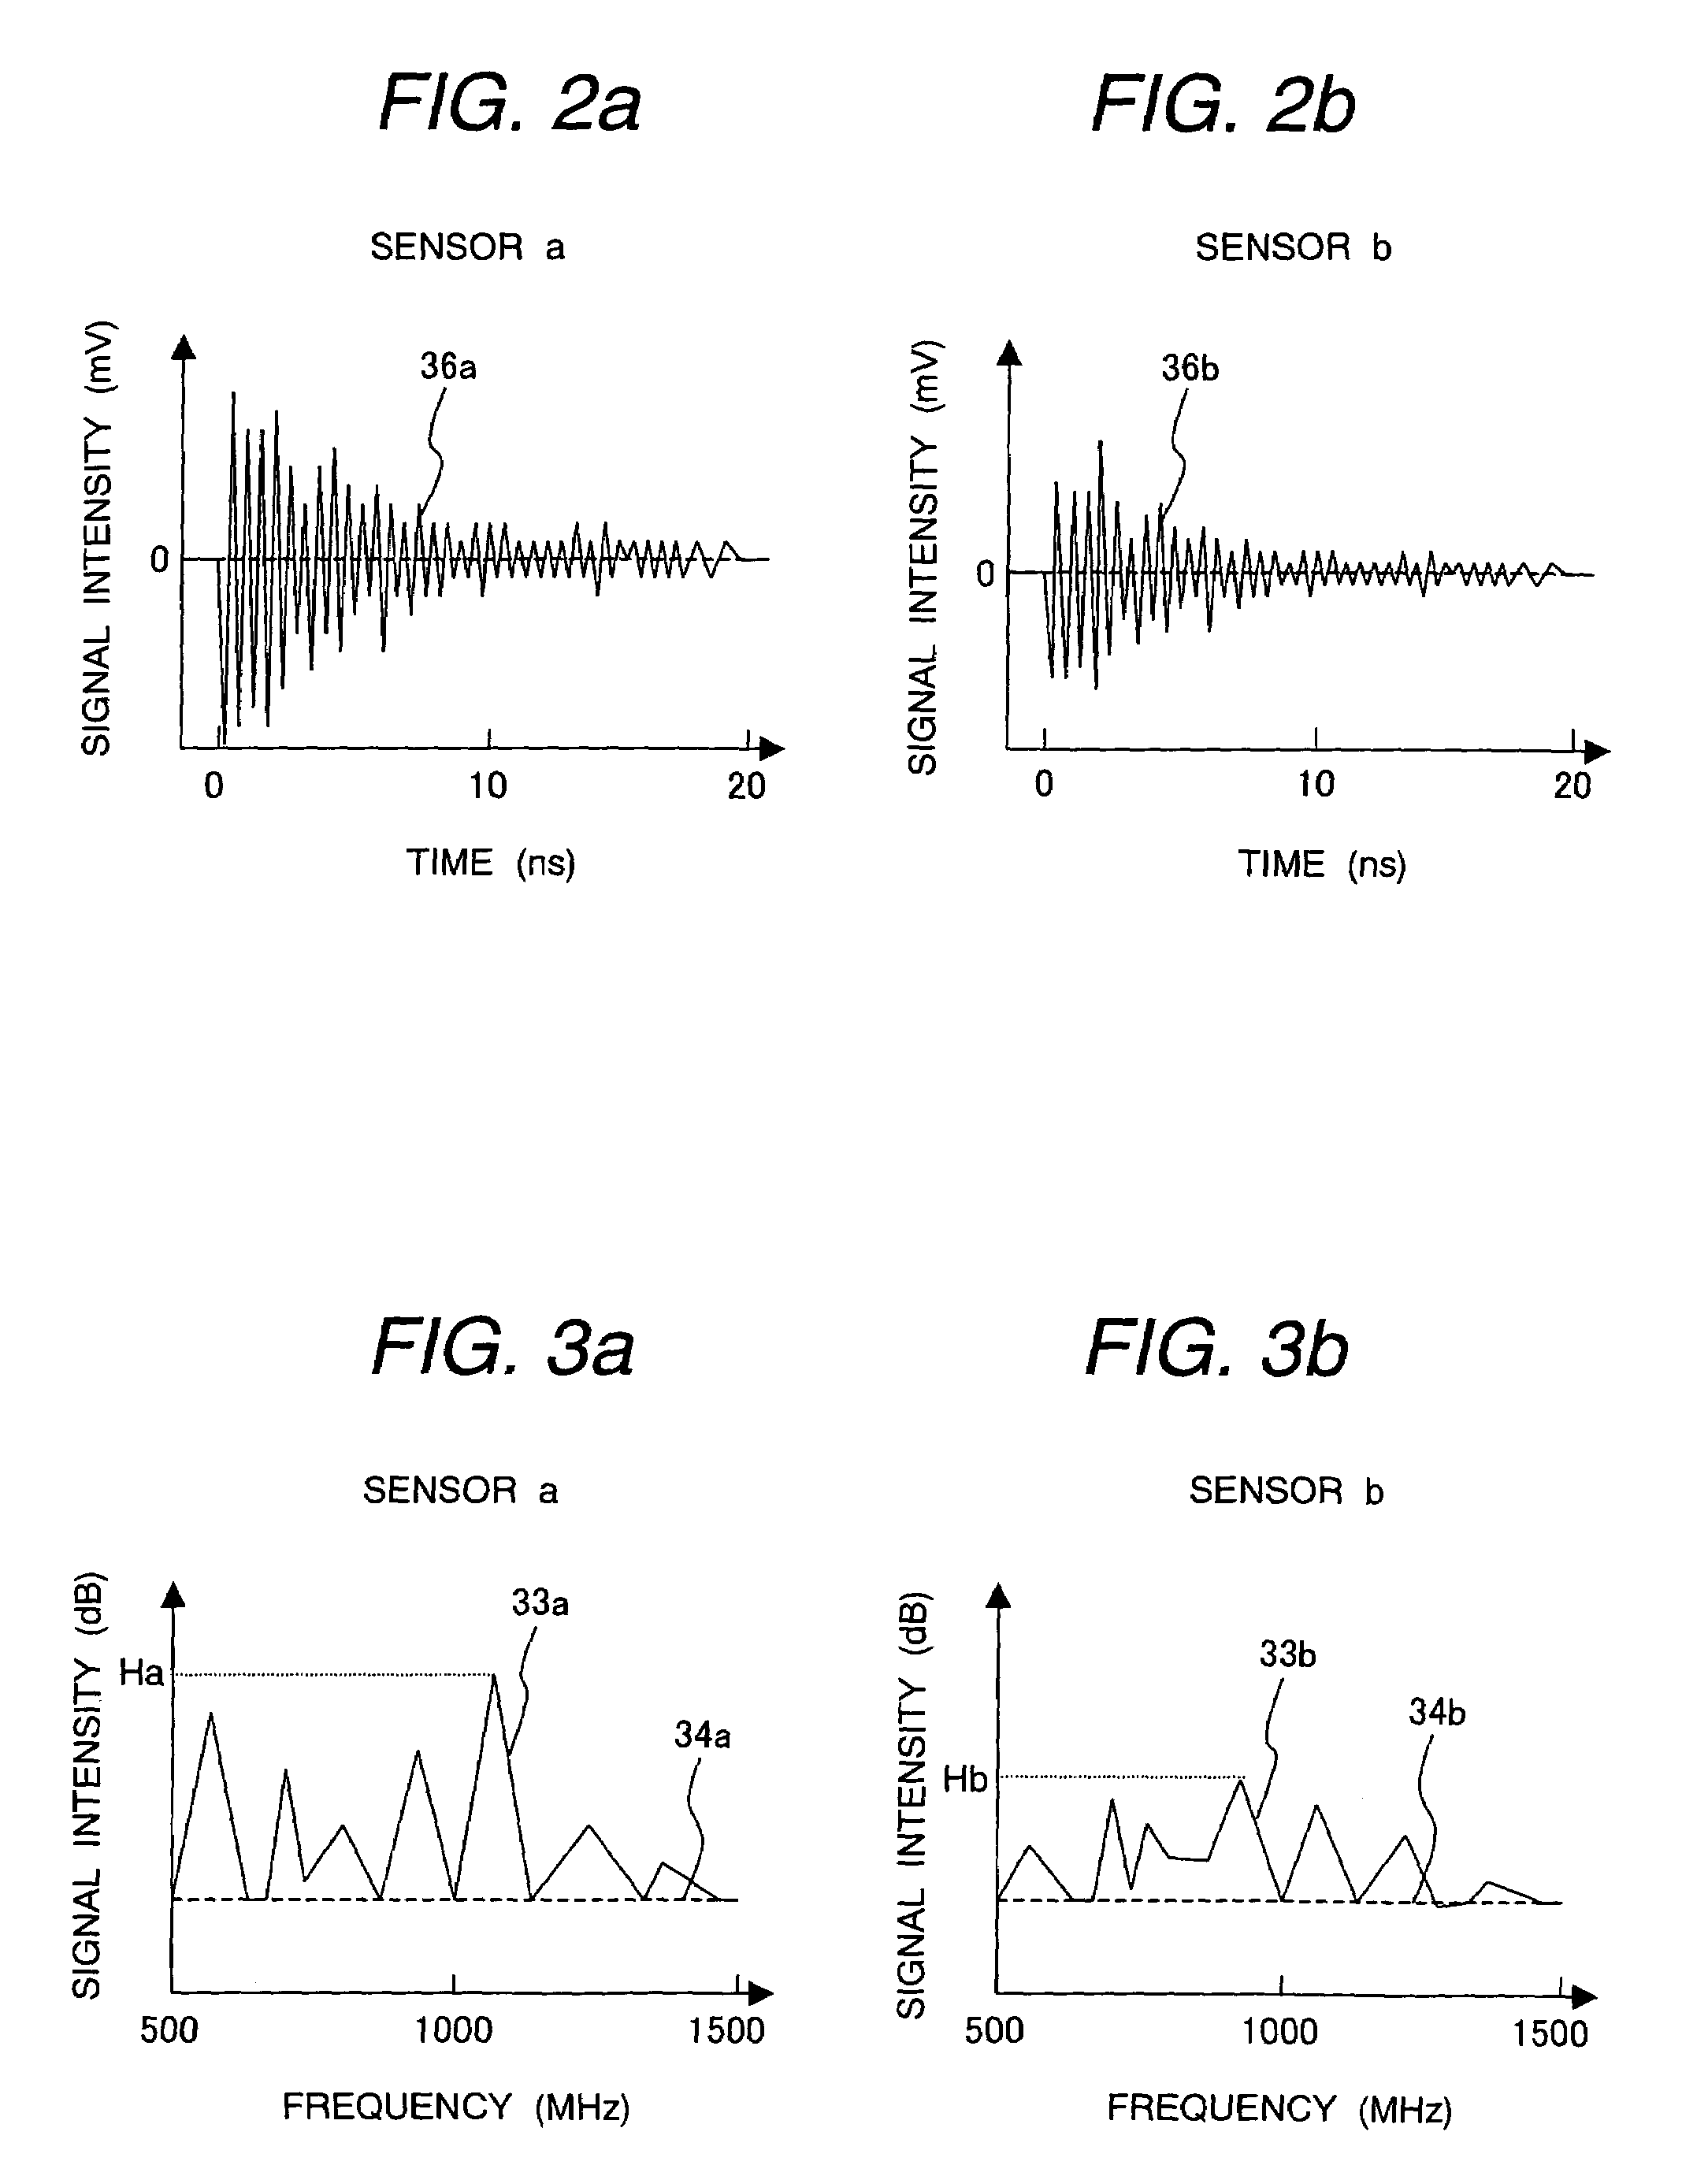 Method and system for monitoring partial discharge in gas-insulated apparatus